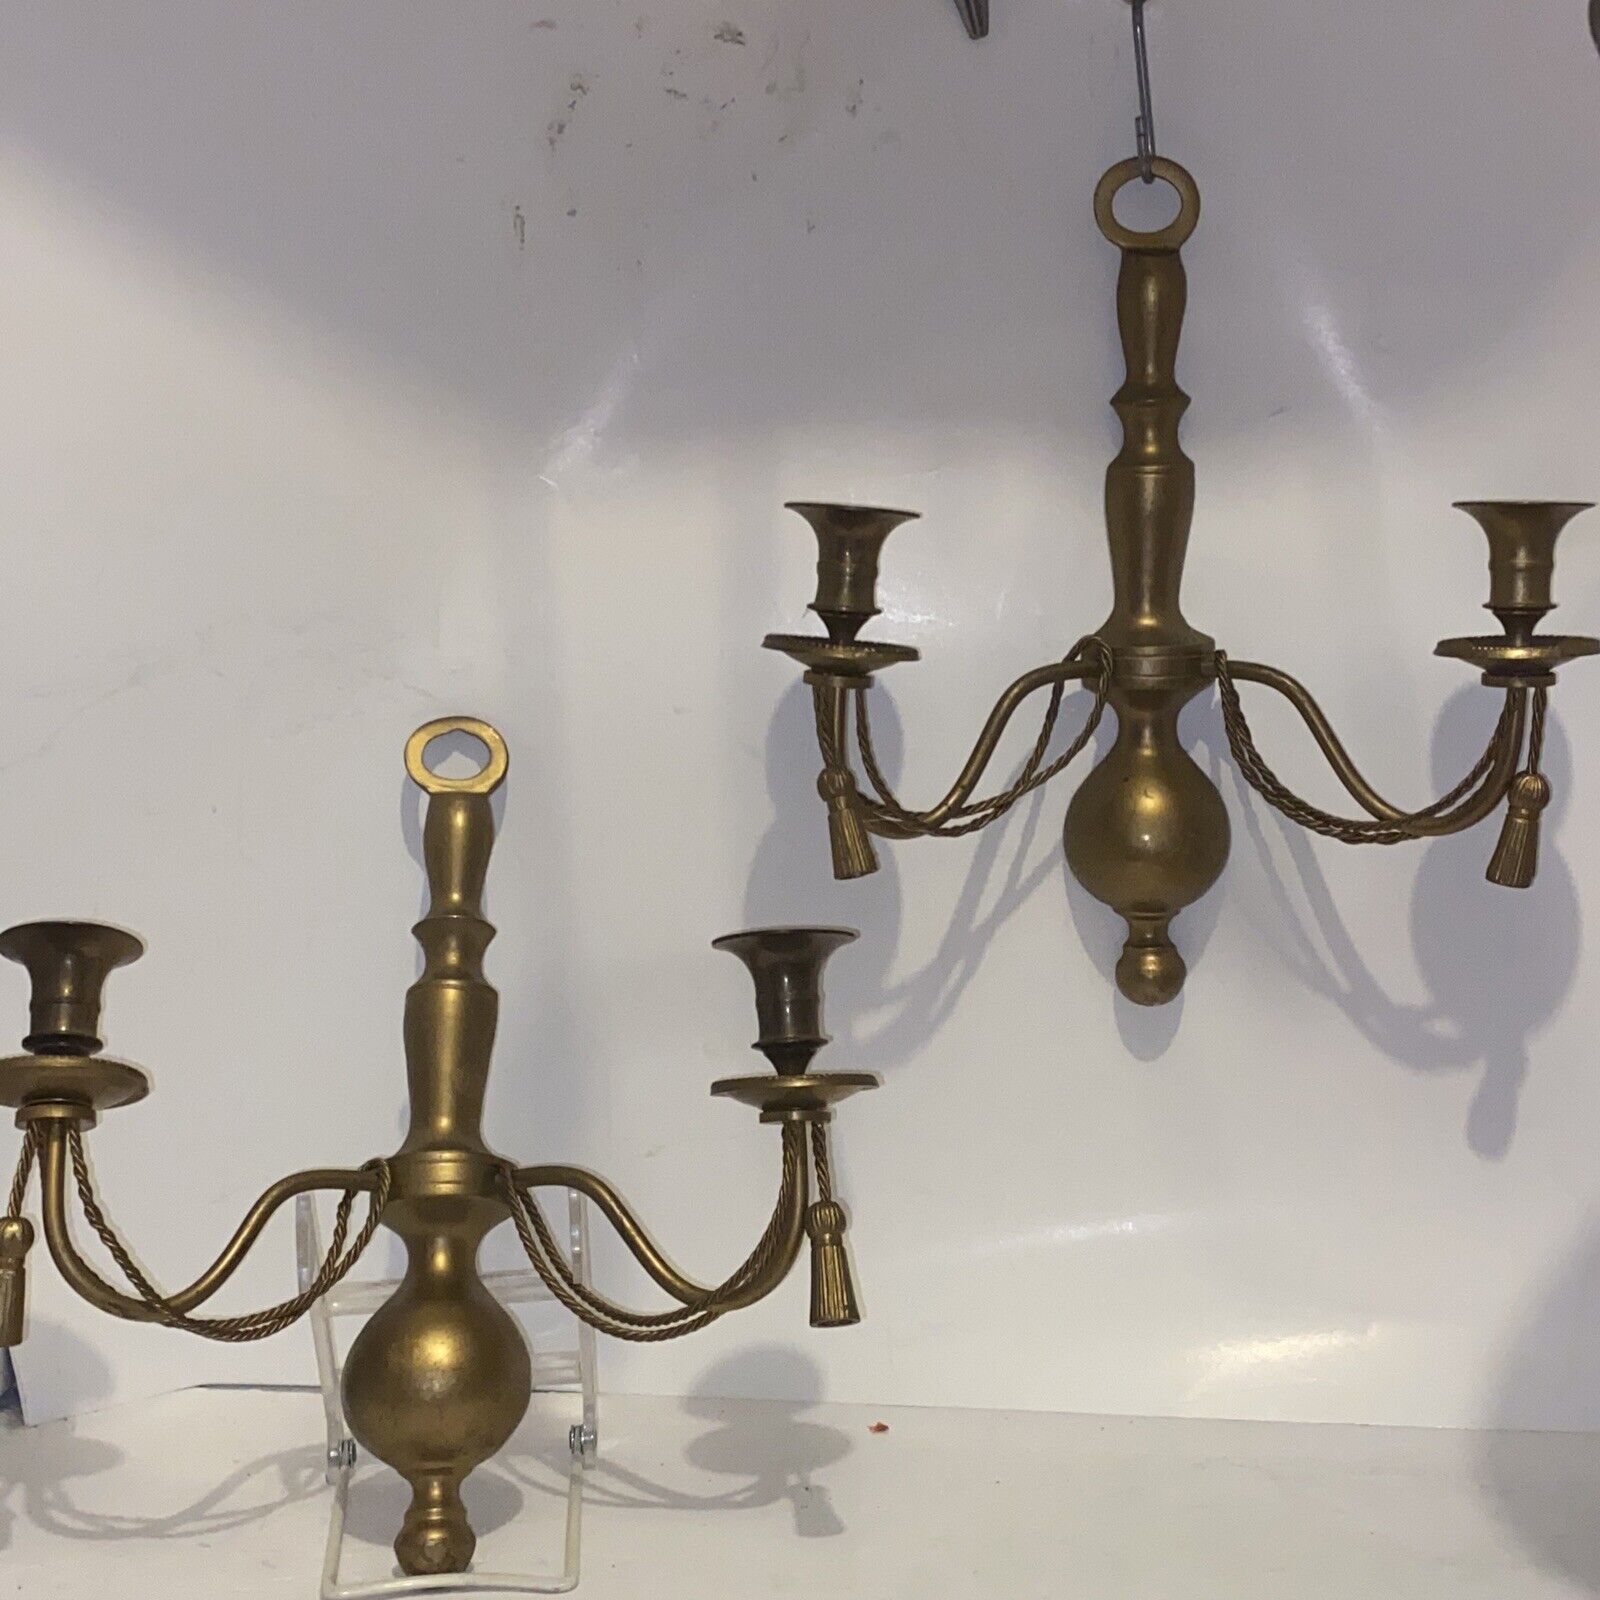 Vintage Pair BRASS DOUBLE ARM CANDLE HOLDERS  WALL SCONCES Rope Tassels Measure